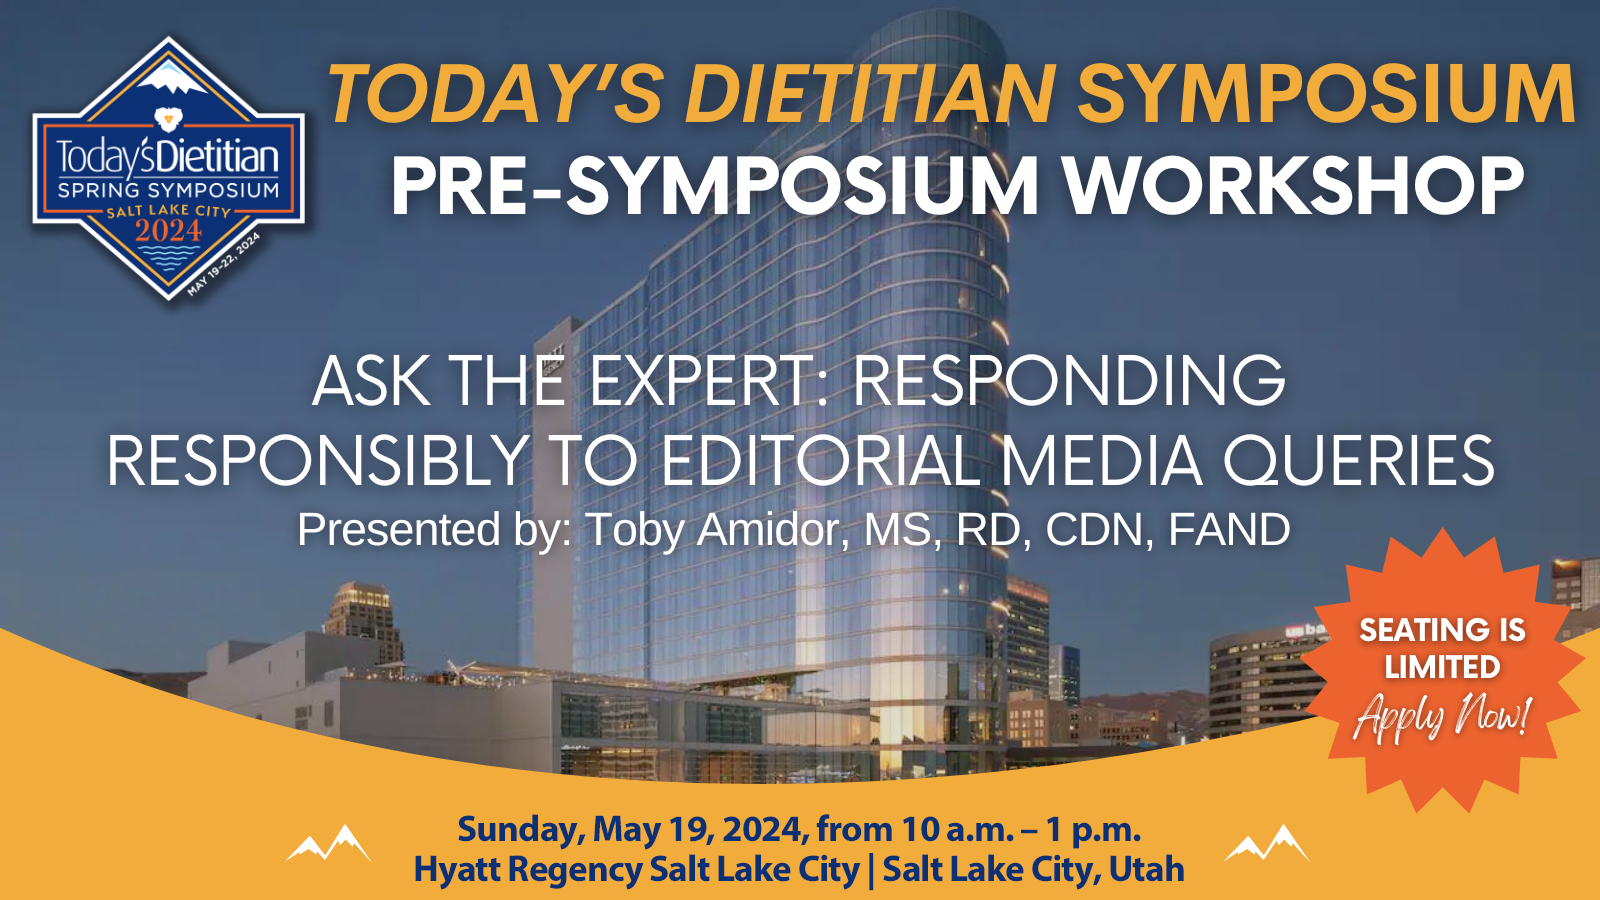 Today's Dietitian 2024 Spring Symposium Pre-Workshop: Ask the Expert: Responding Responsibly to Editorial Media Queries | Toby Amidor, MS, RD, CDN, FAND Sponsored by: General Mills Big G Cereals | 3 CEUs | Hyatt Regency Salt Lake City